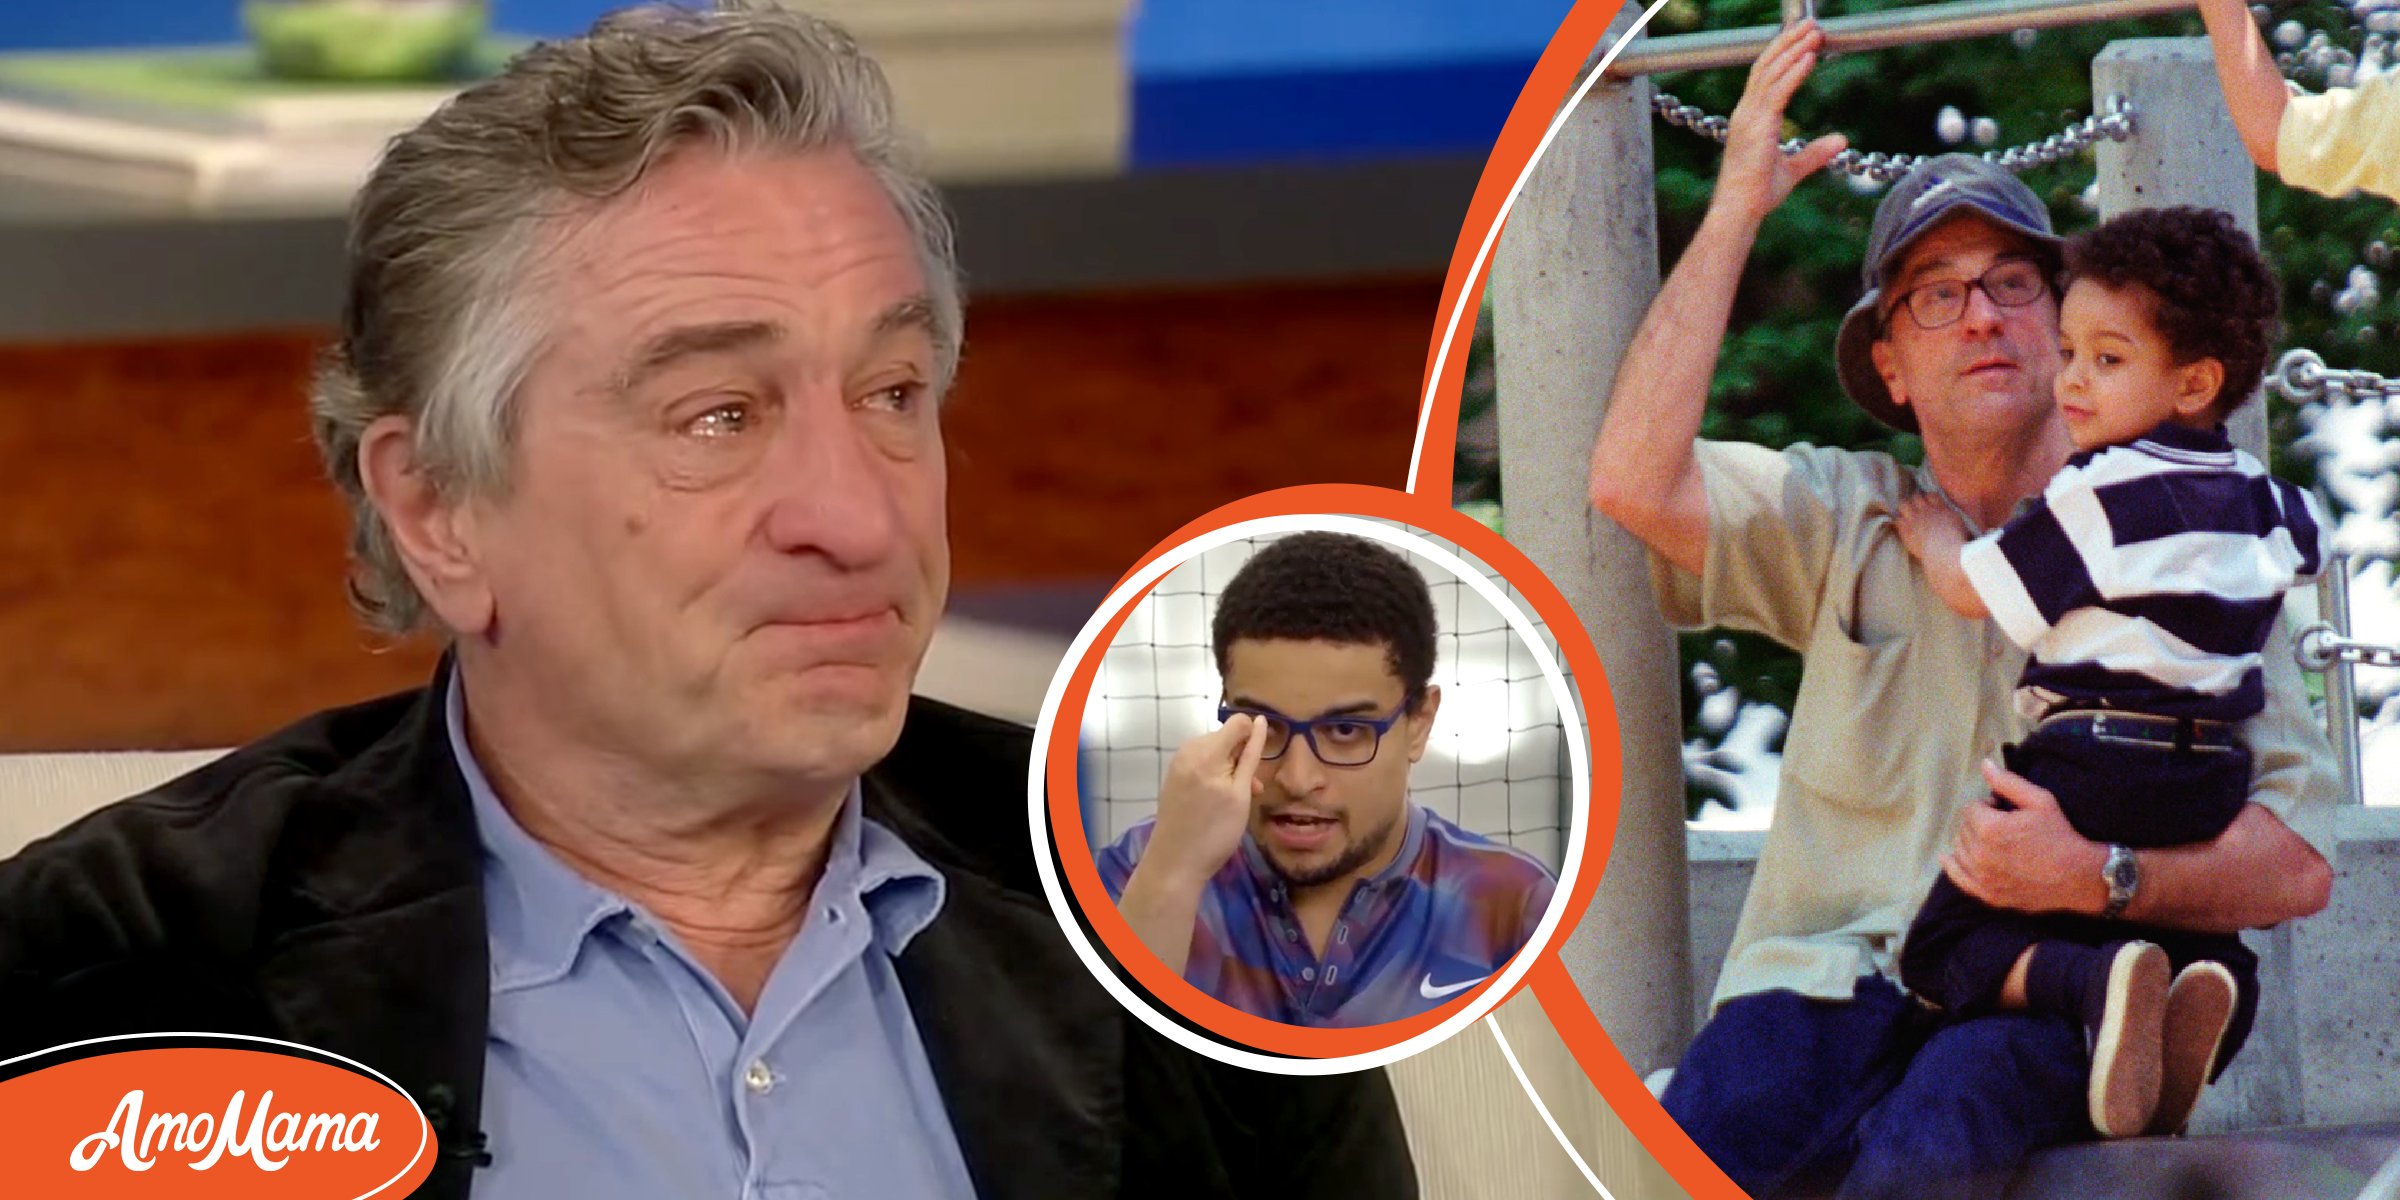 Robert De Niro Teared Up While Sharing Challenges Faced By Autistic Son Who He Fought To Get